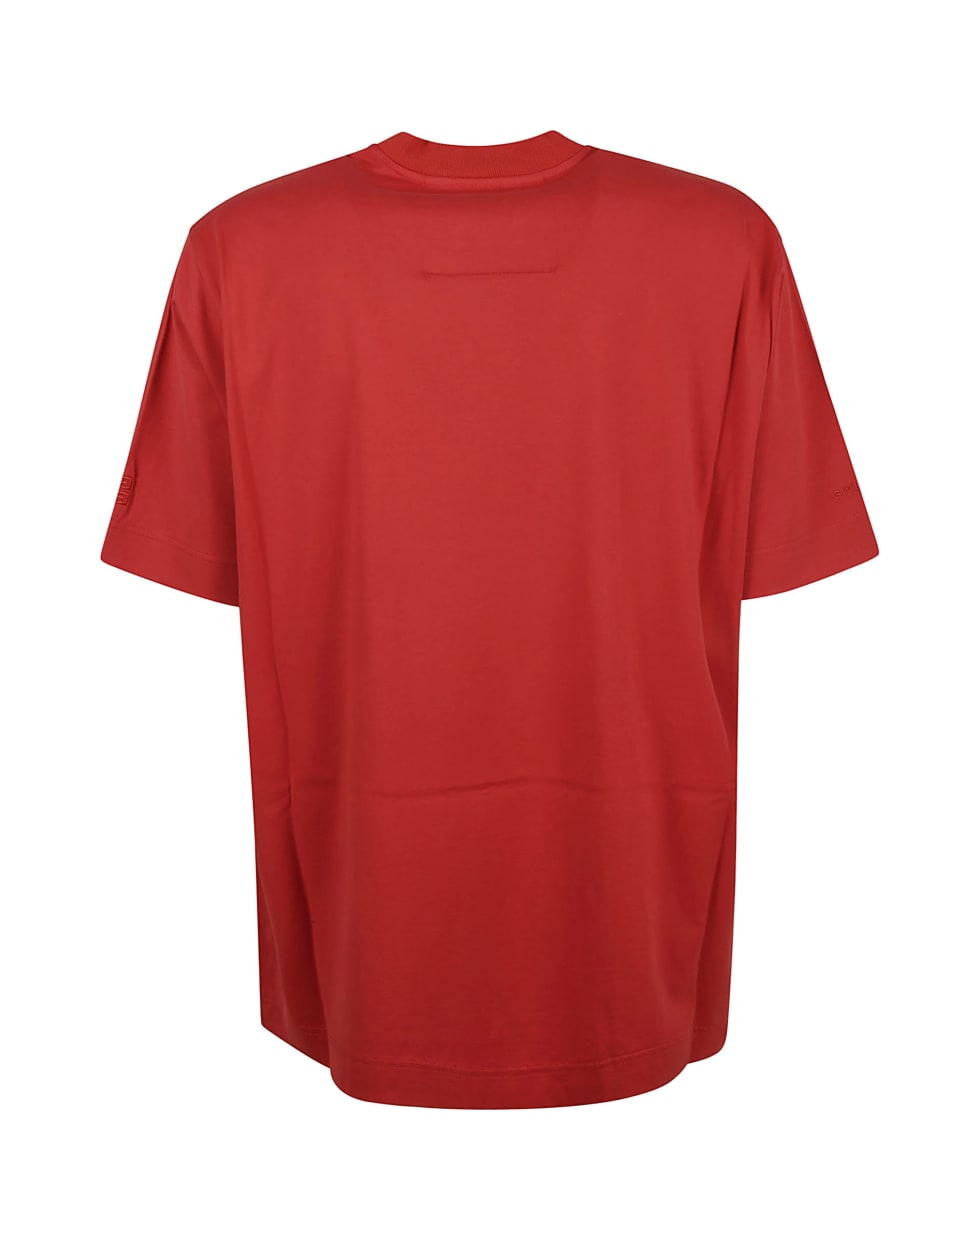 Givenchy Nine Miles Deep Embroidered T-shirt - Medium Red